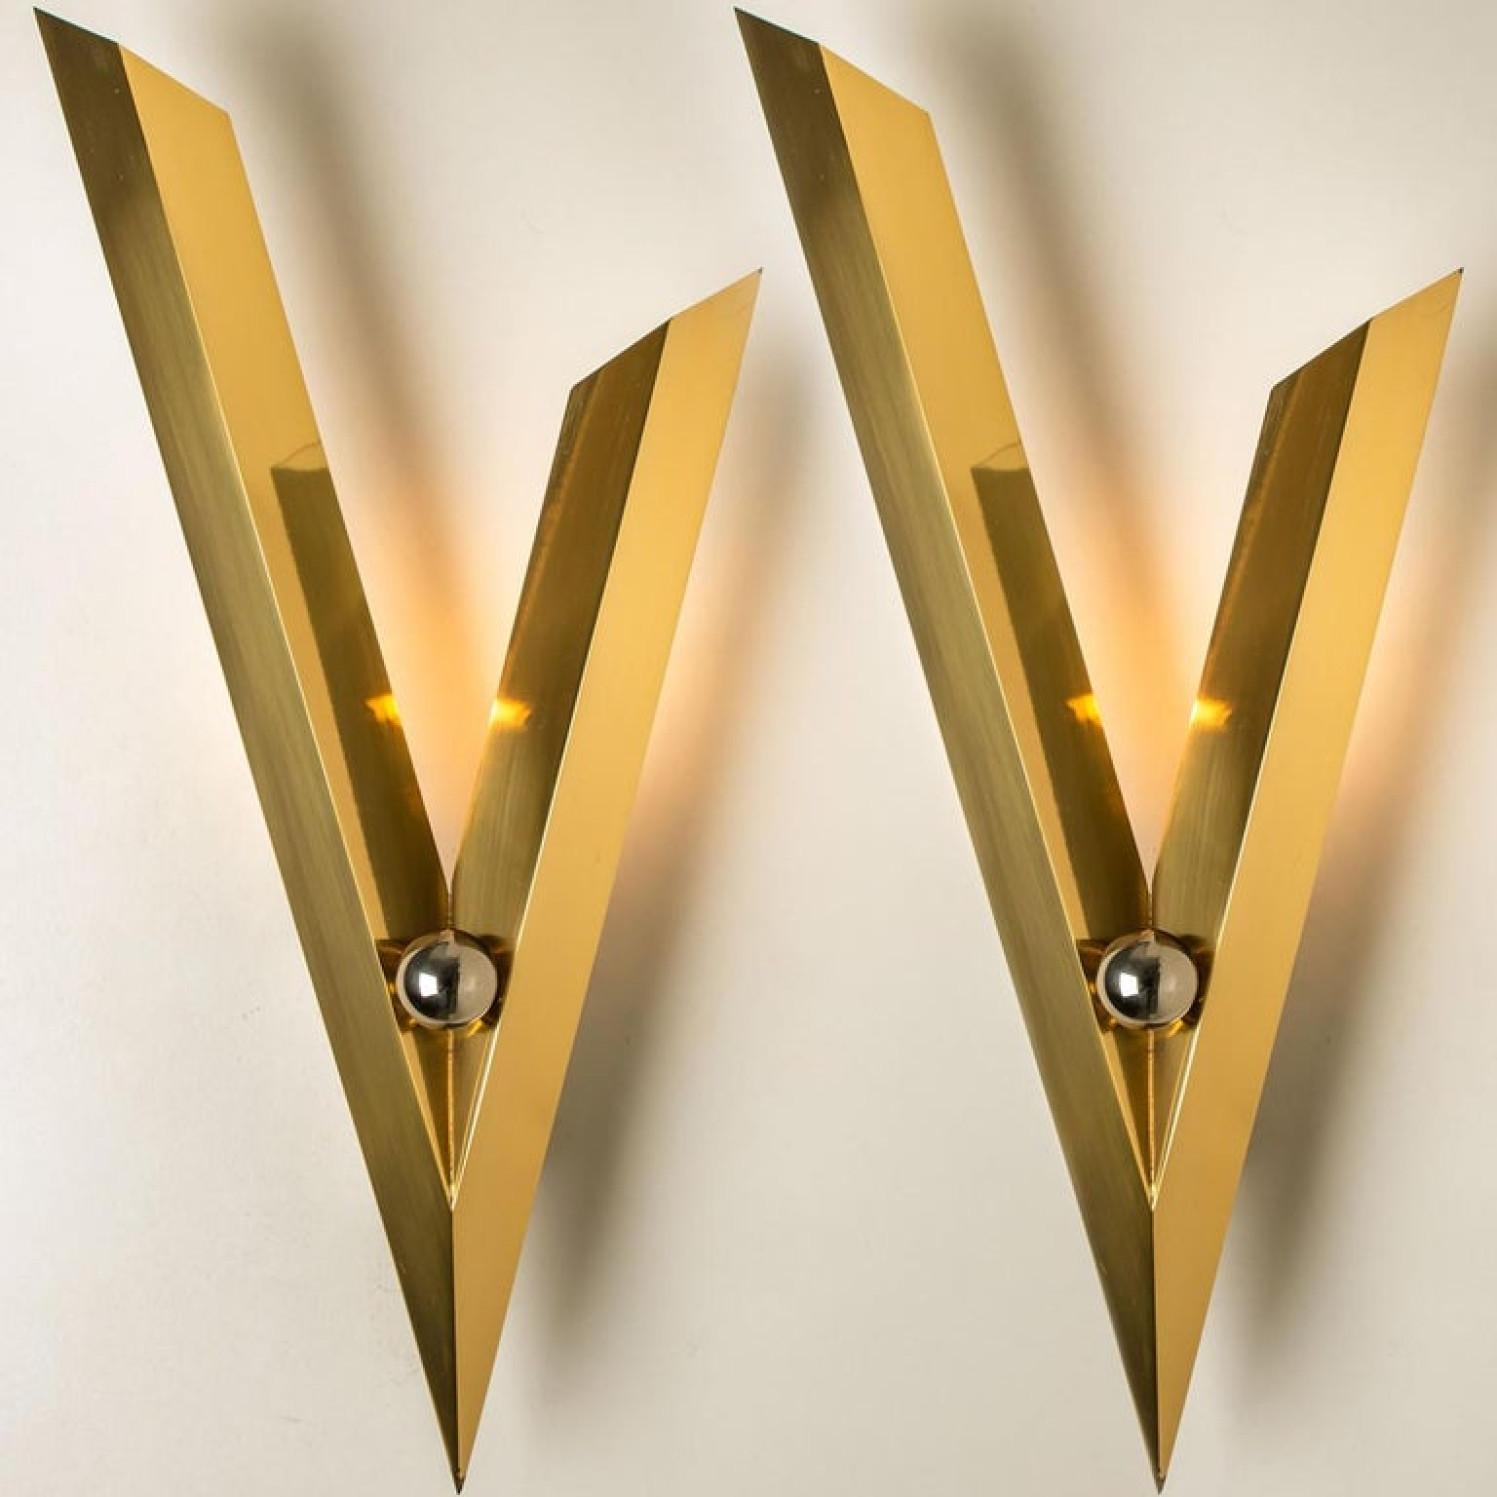 Other 1 of the 5 Art Deco Style Solid Brass and Chrome Wall Sconces, 1980s For Sale